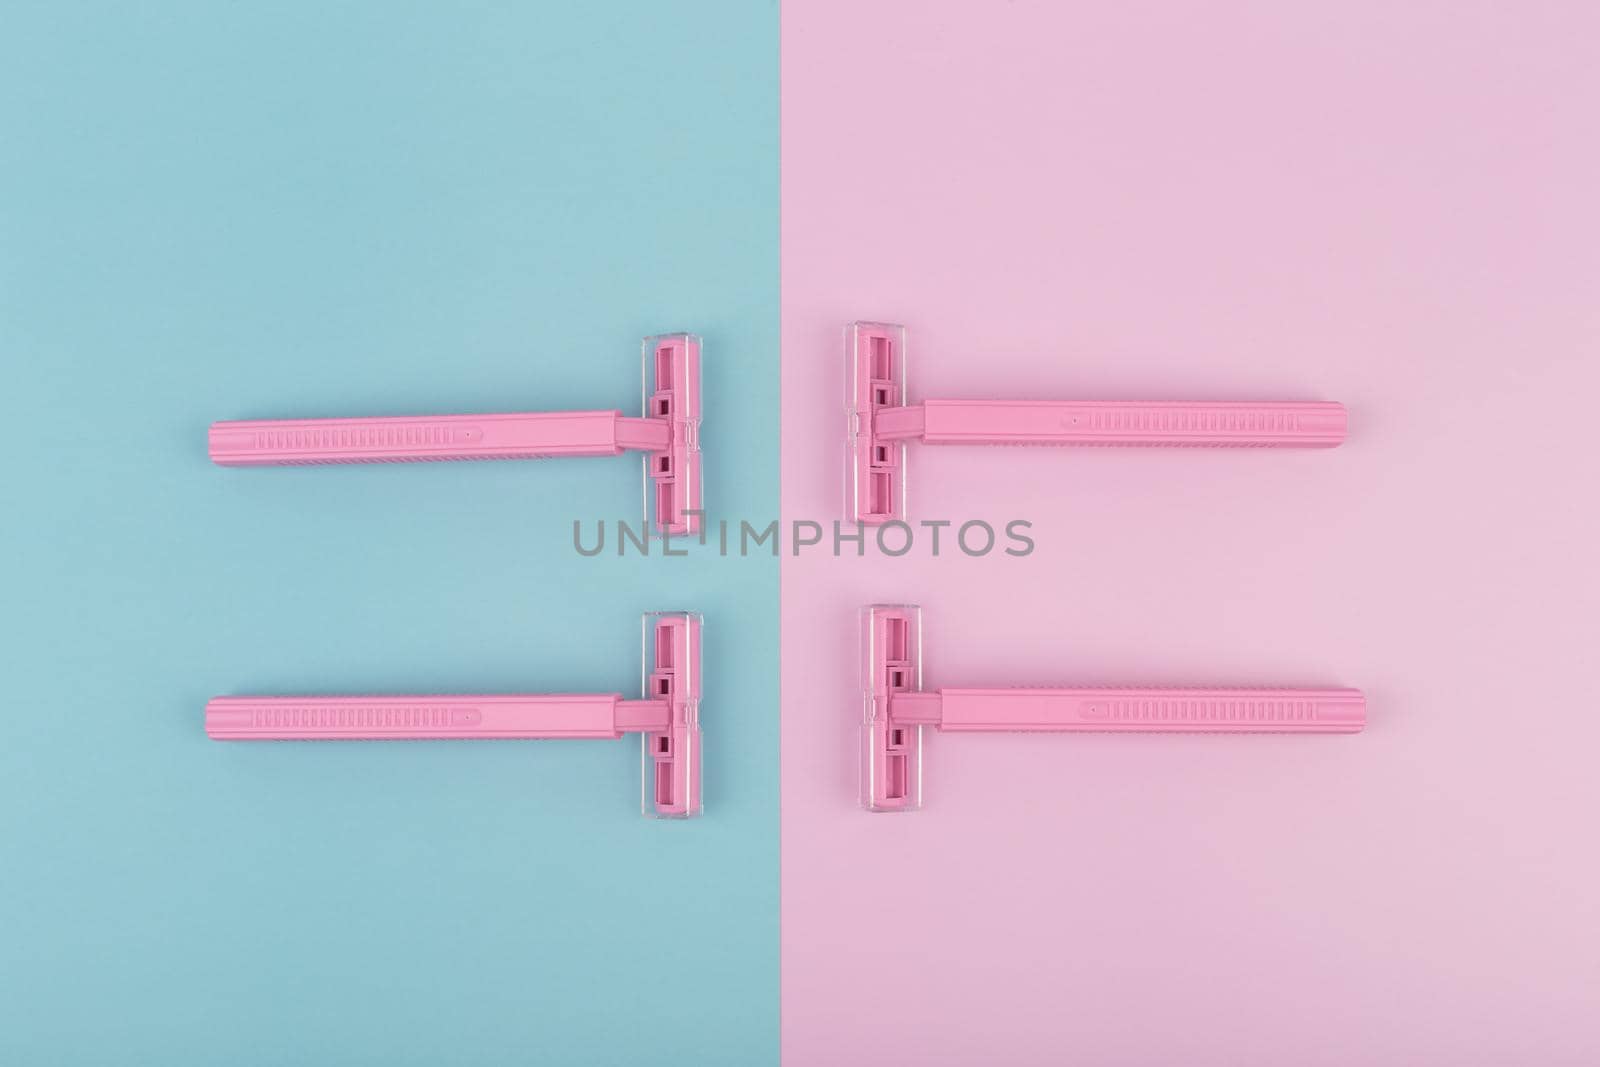 Top view of pink plastic razors on pink and blue background. High quality photo